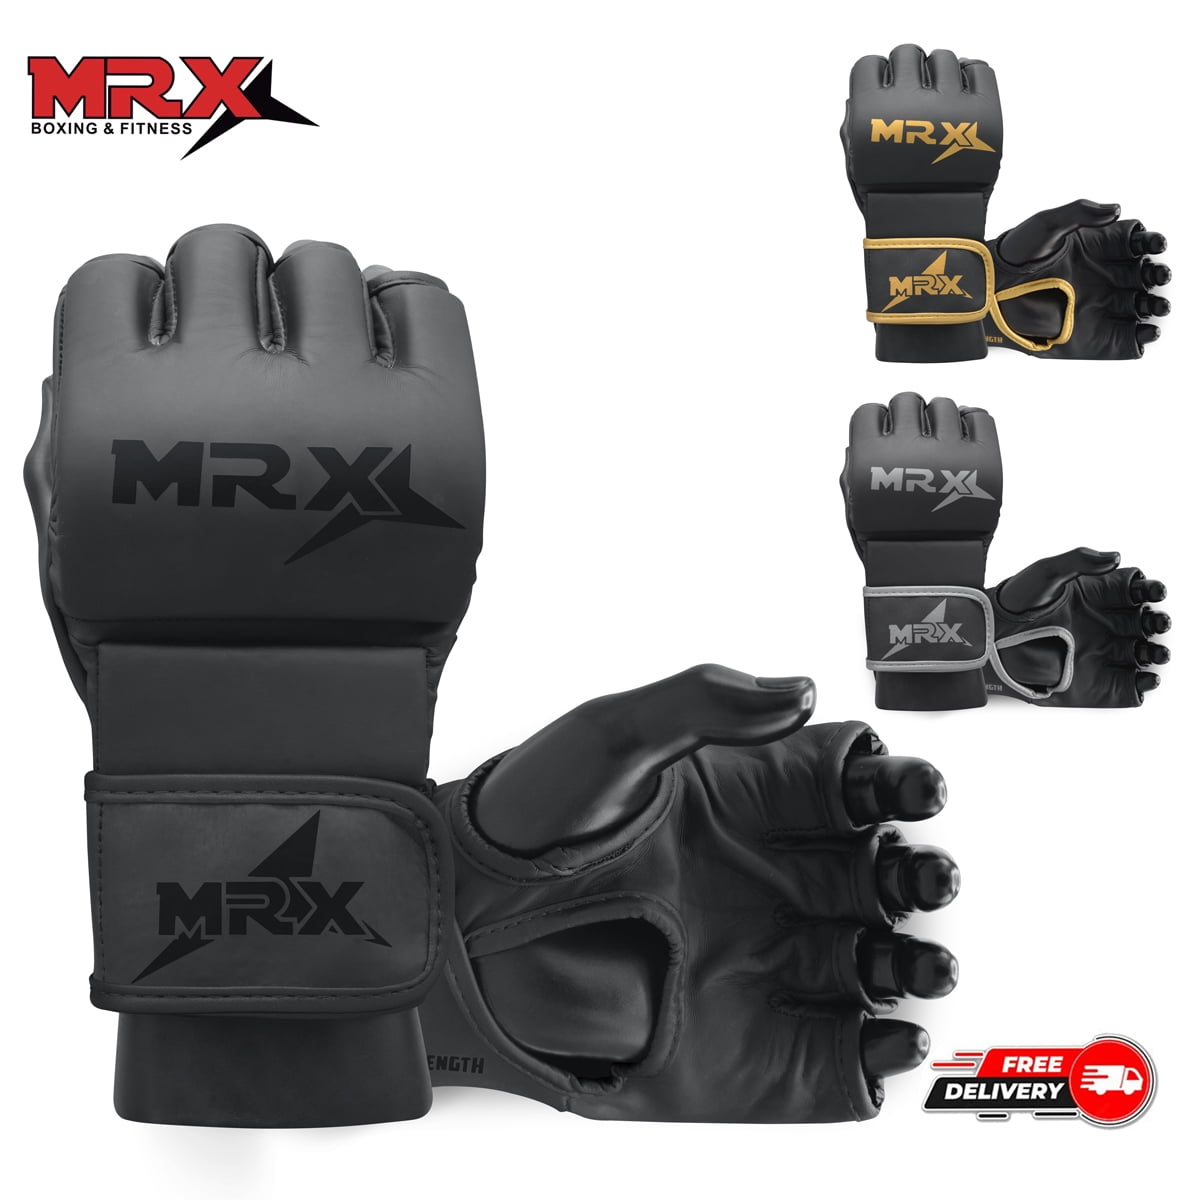 Combat Grappling Boxing Gloves Muay Thai MMA UFC Fighting Punch Training Mitts 